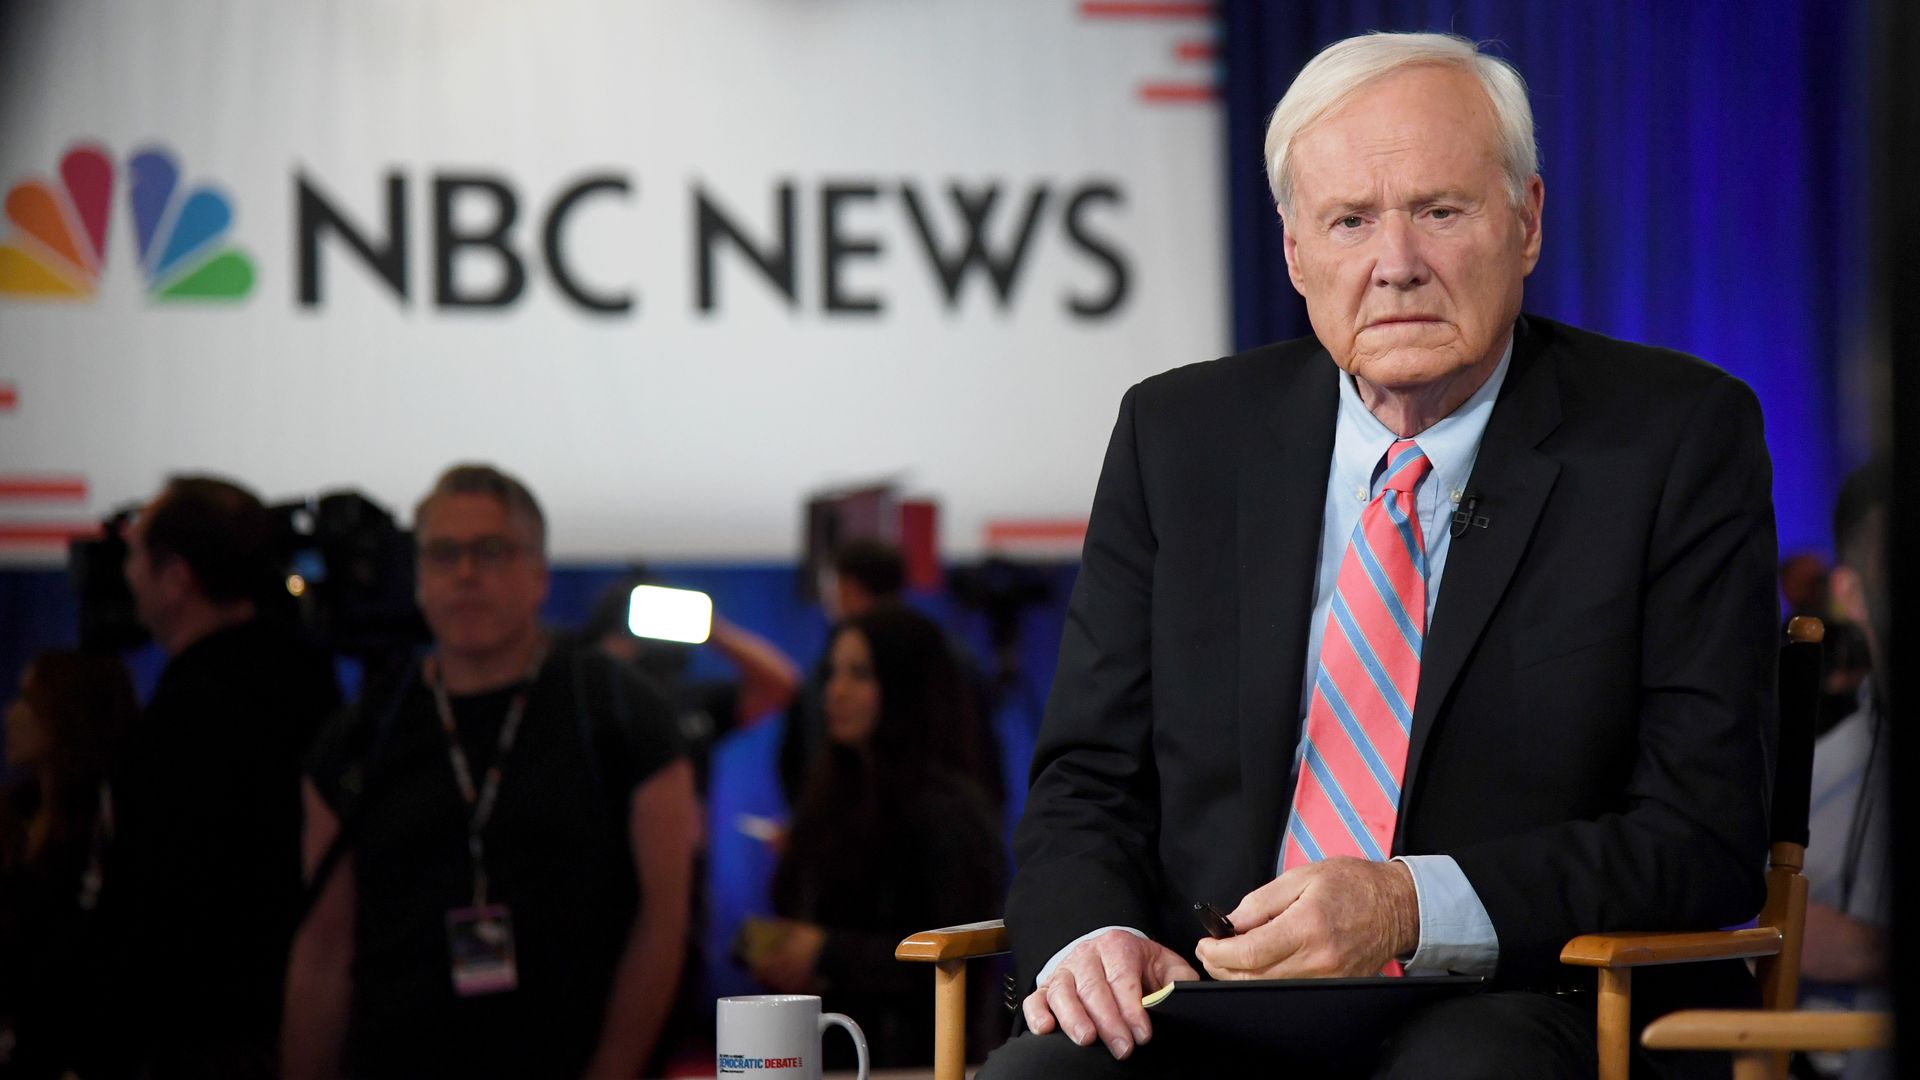 Chris Matthews of MSNBC waits to go on the air after the Democratic presidential primary debate on February 19, 2020 in Las Vegas